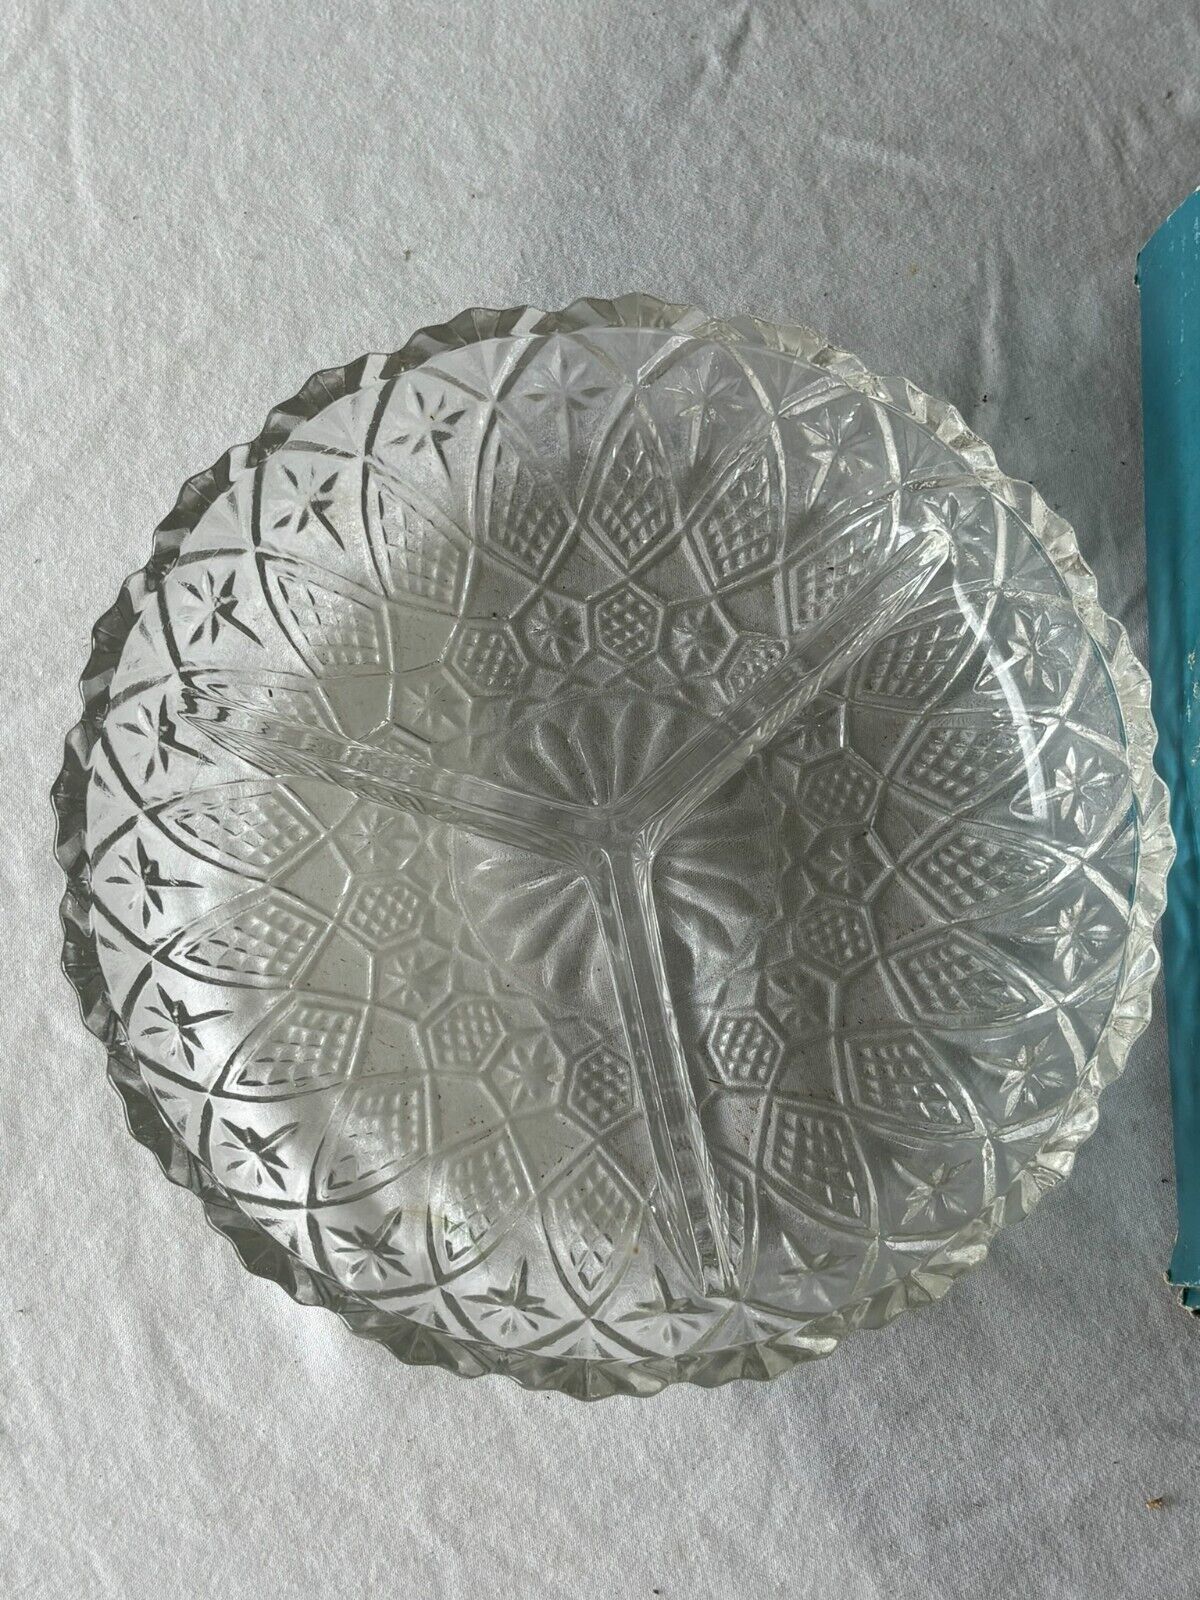 Jewelite Faceted & Divided Glass Holiday Serving Dish by Gibson Design 8\